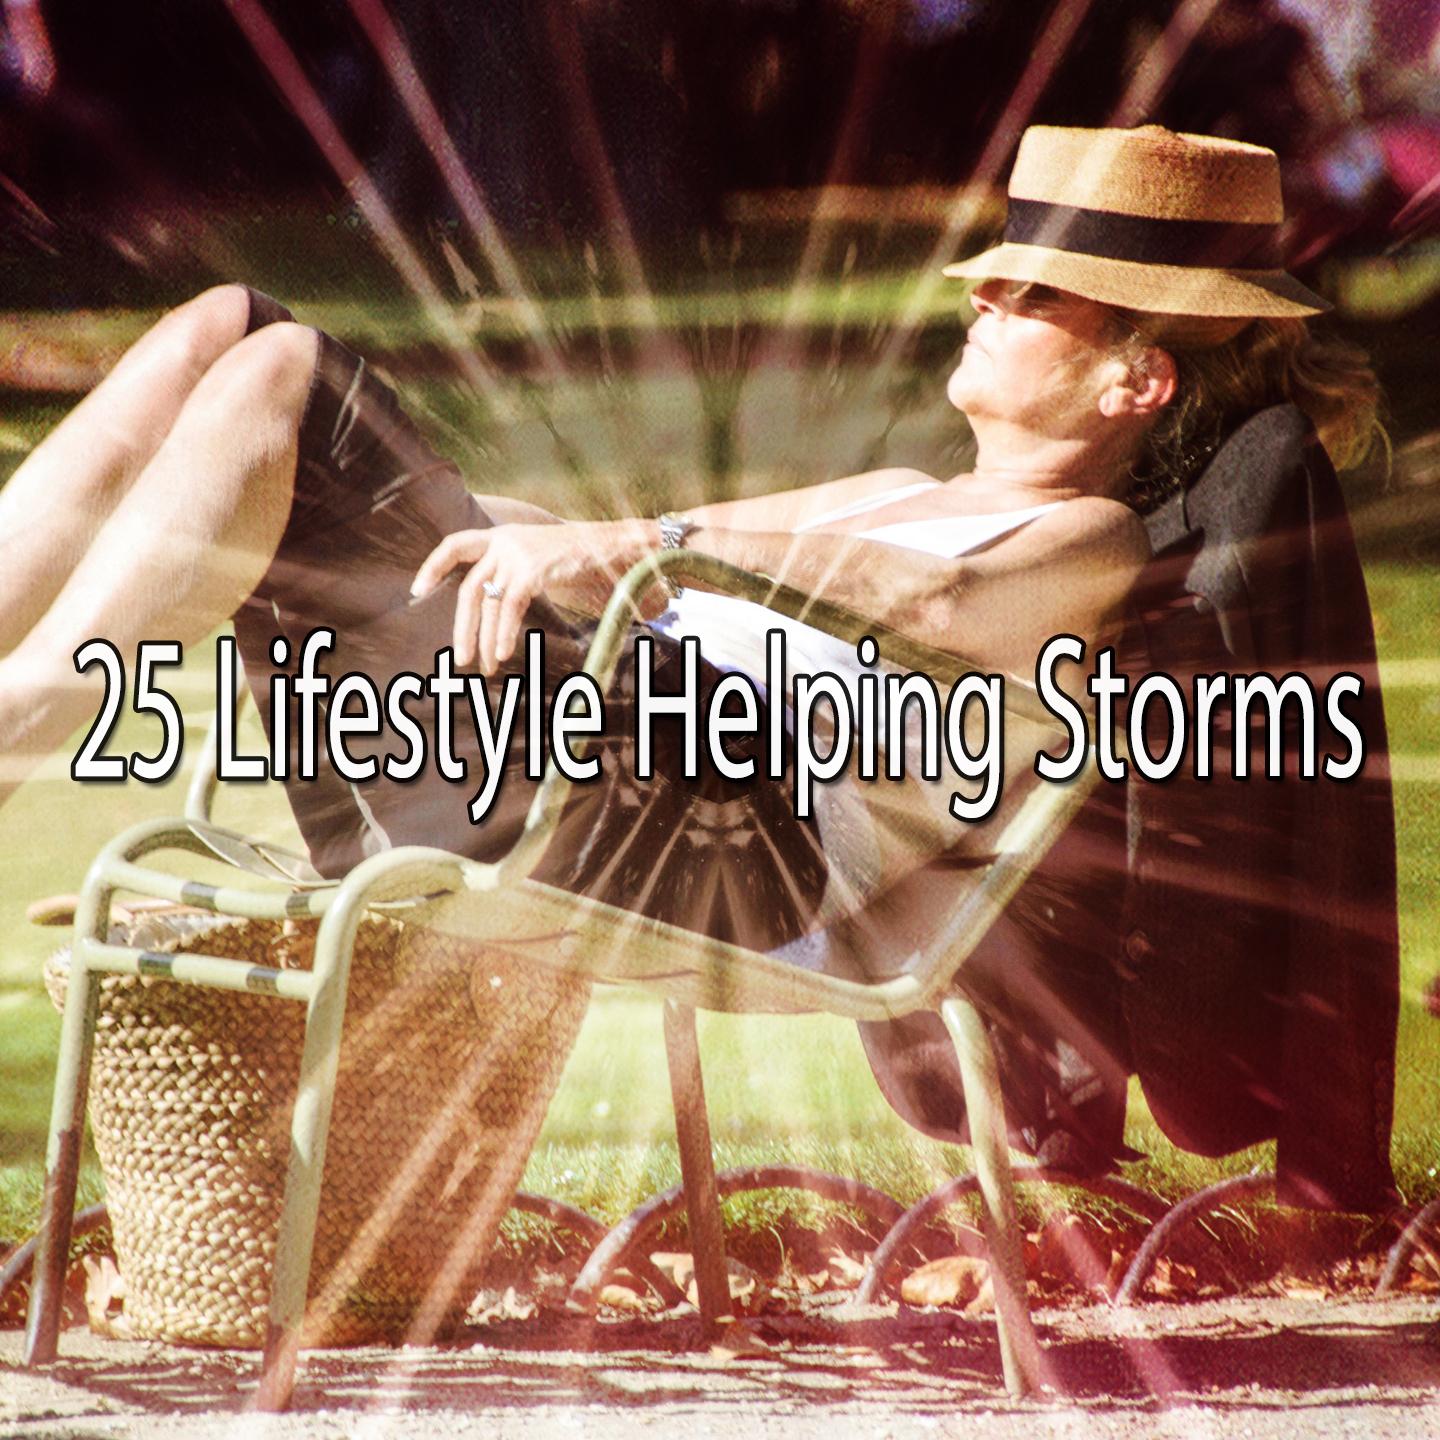 25 Lifestyle Helping Storms